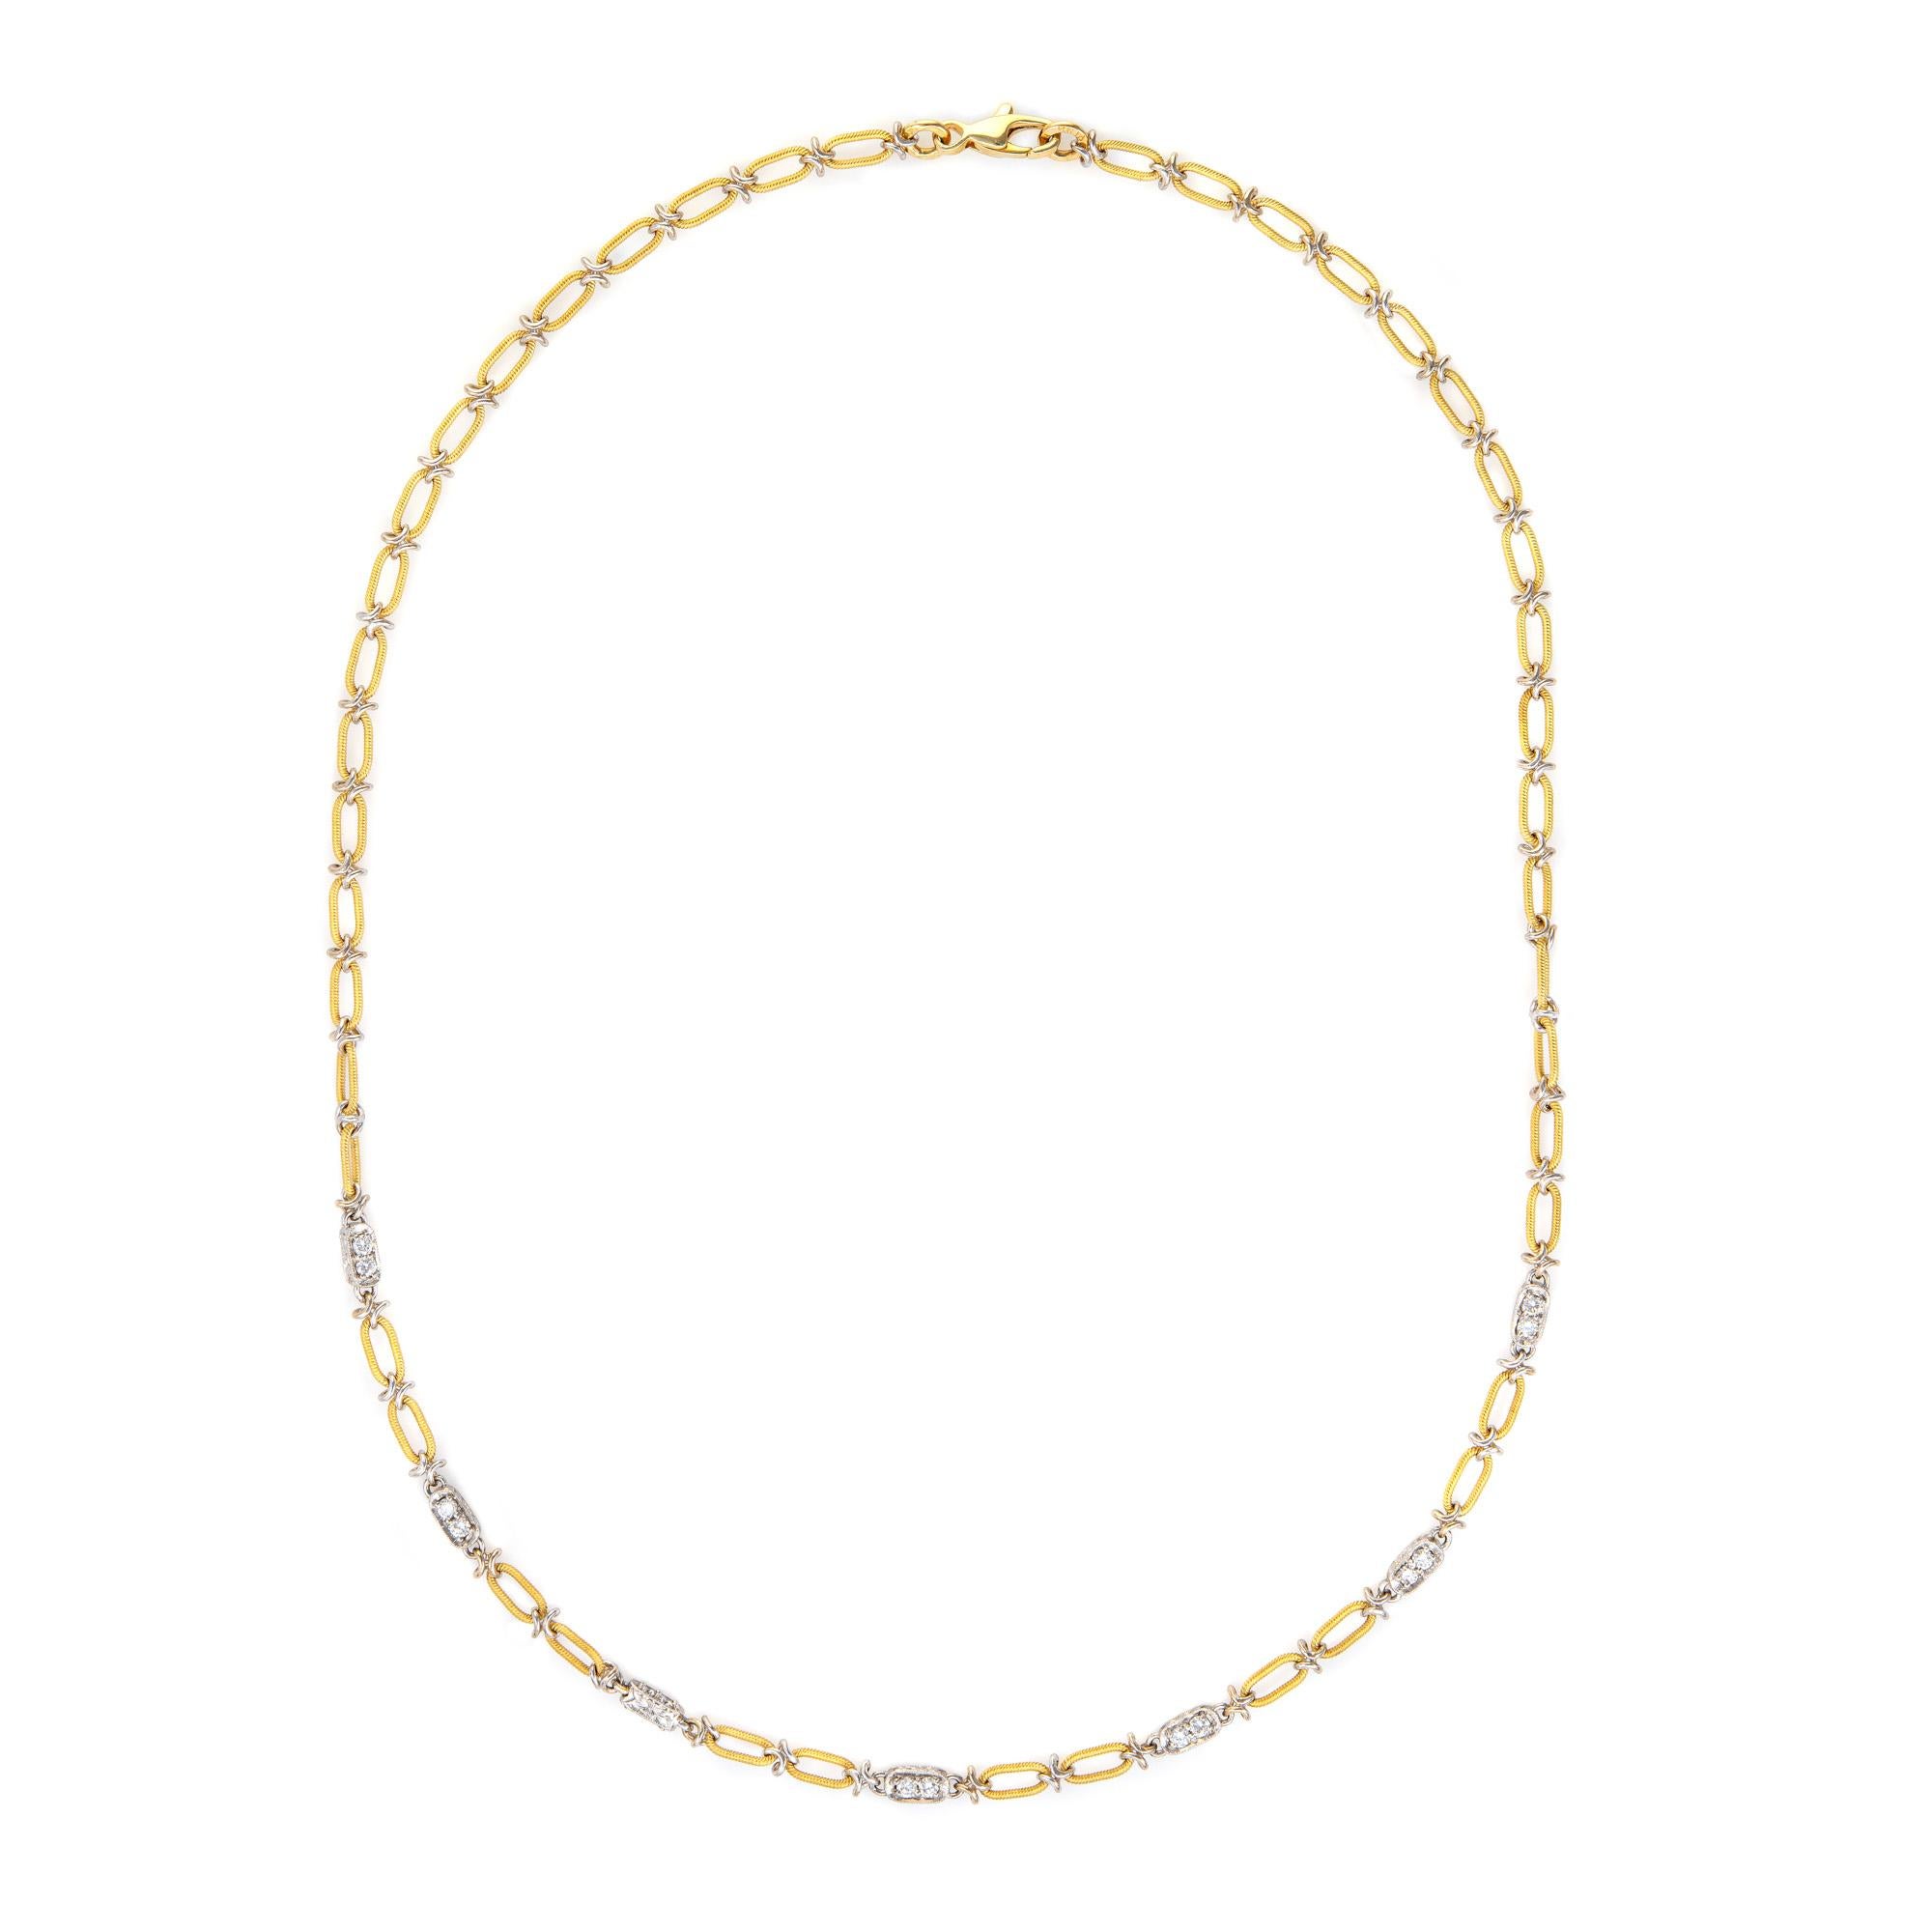 Stylish and finely detailed diamond necklace crafted in 18k yellow gold & platinum. 

Diamonds total an estimated 0.24 carats (estimated at H-I color and VS2-SI1 clarity).
The finely detailed necklace is crafted with 18k yellow gold oval links,